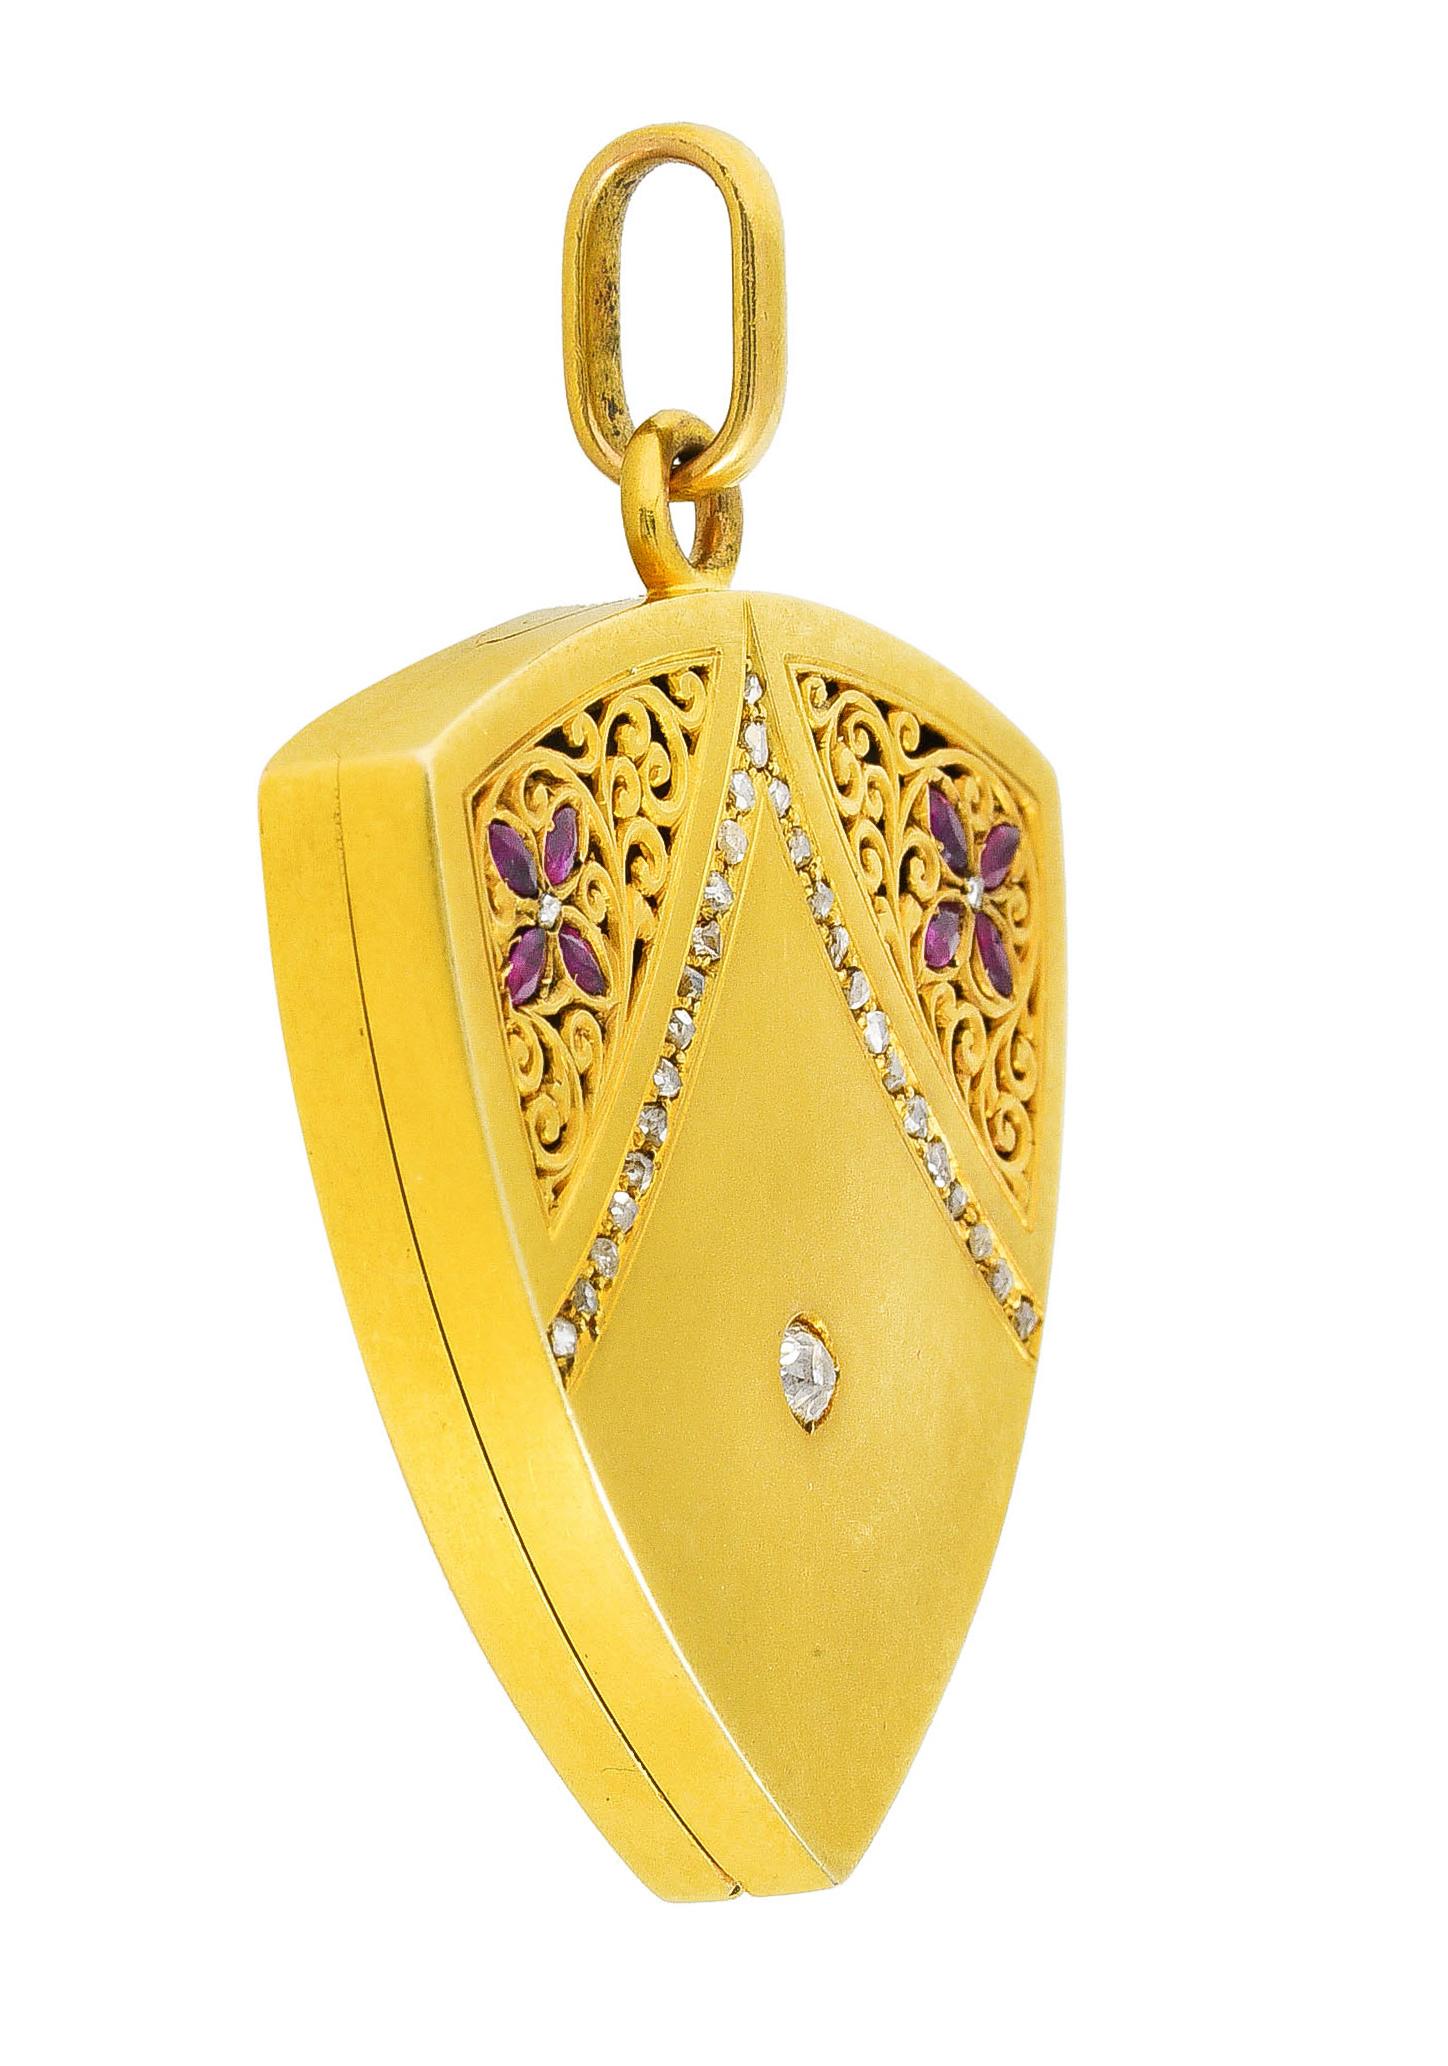 Pendant is shield in form and pierced with decoratively scrolling foliate. With floral motifs comprised of marquise cut rubies. Weighing in total approximately 0.30 carat - purplish red in color. Centering an old mine cut diamond weighing